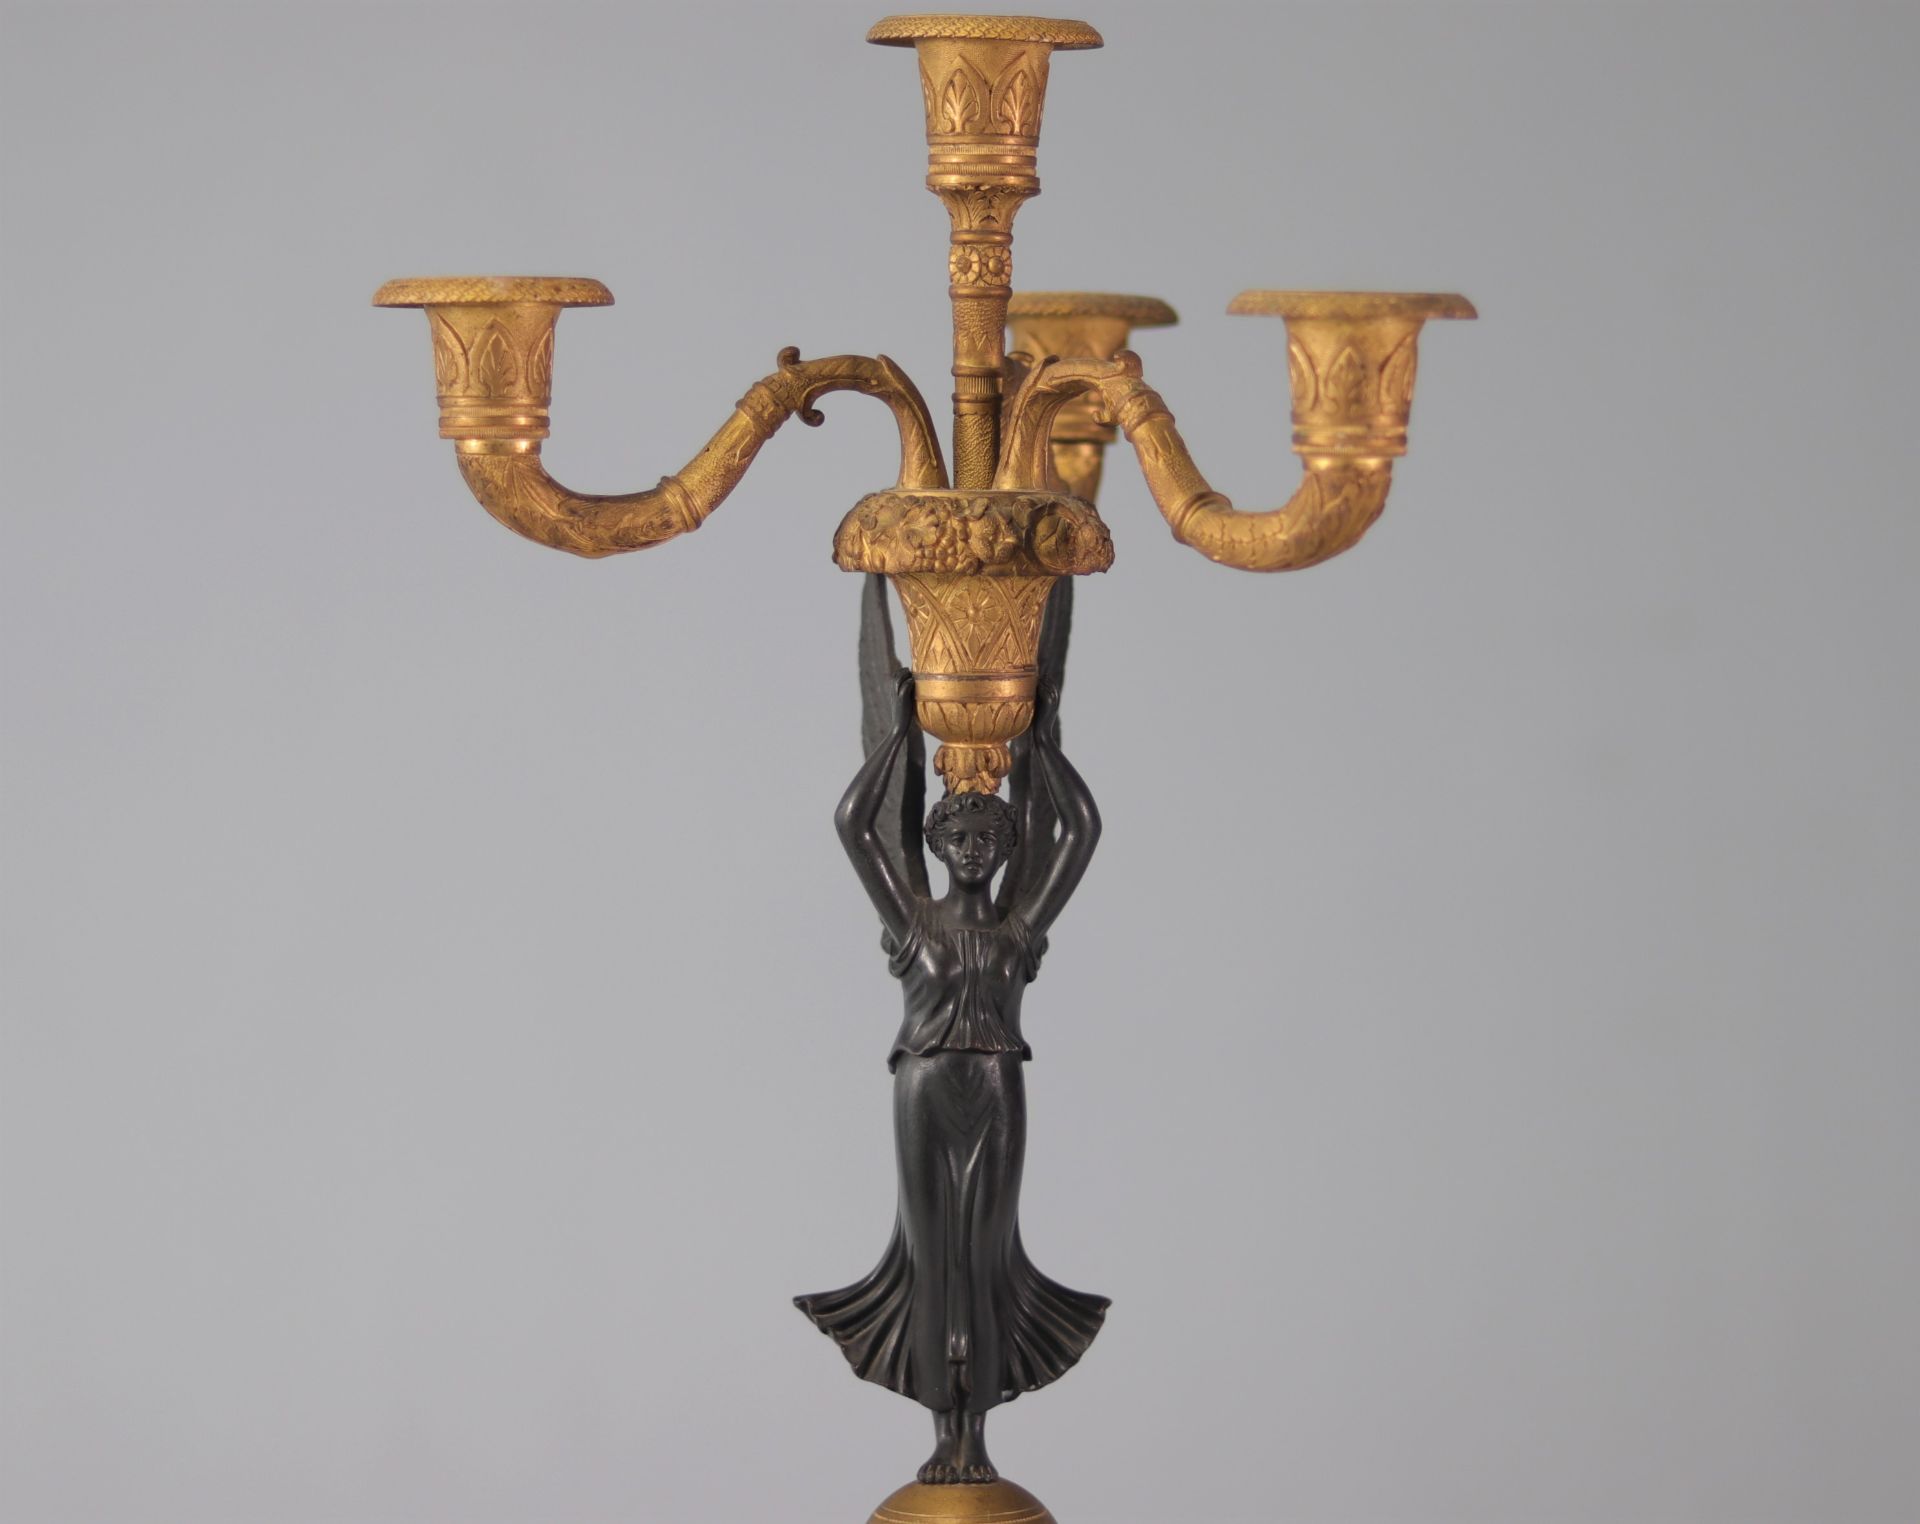 Pair of Empire candlesticks "winged women carrying fruit baskets" - Image 4 of 5